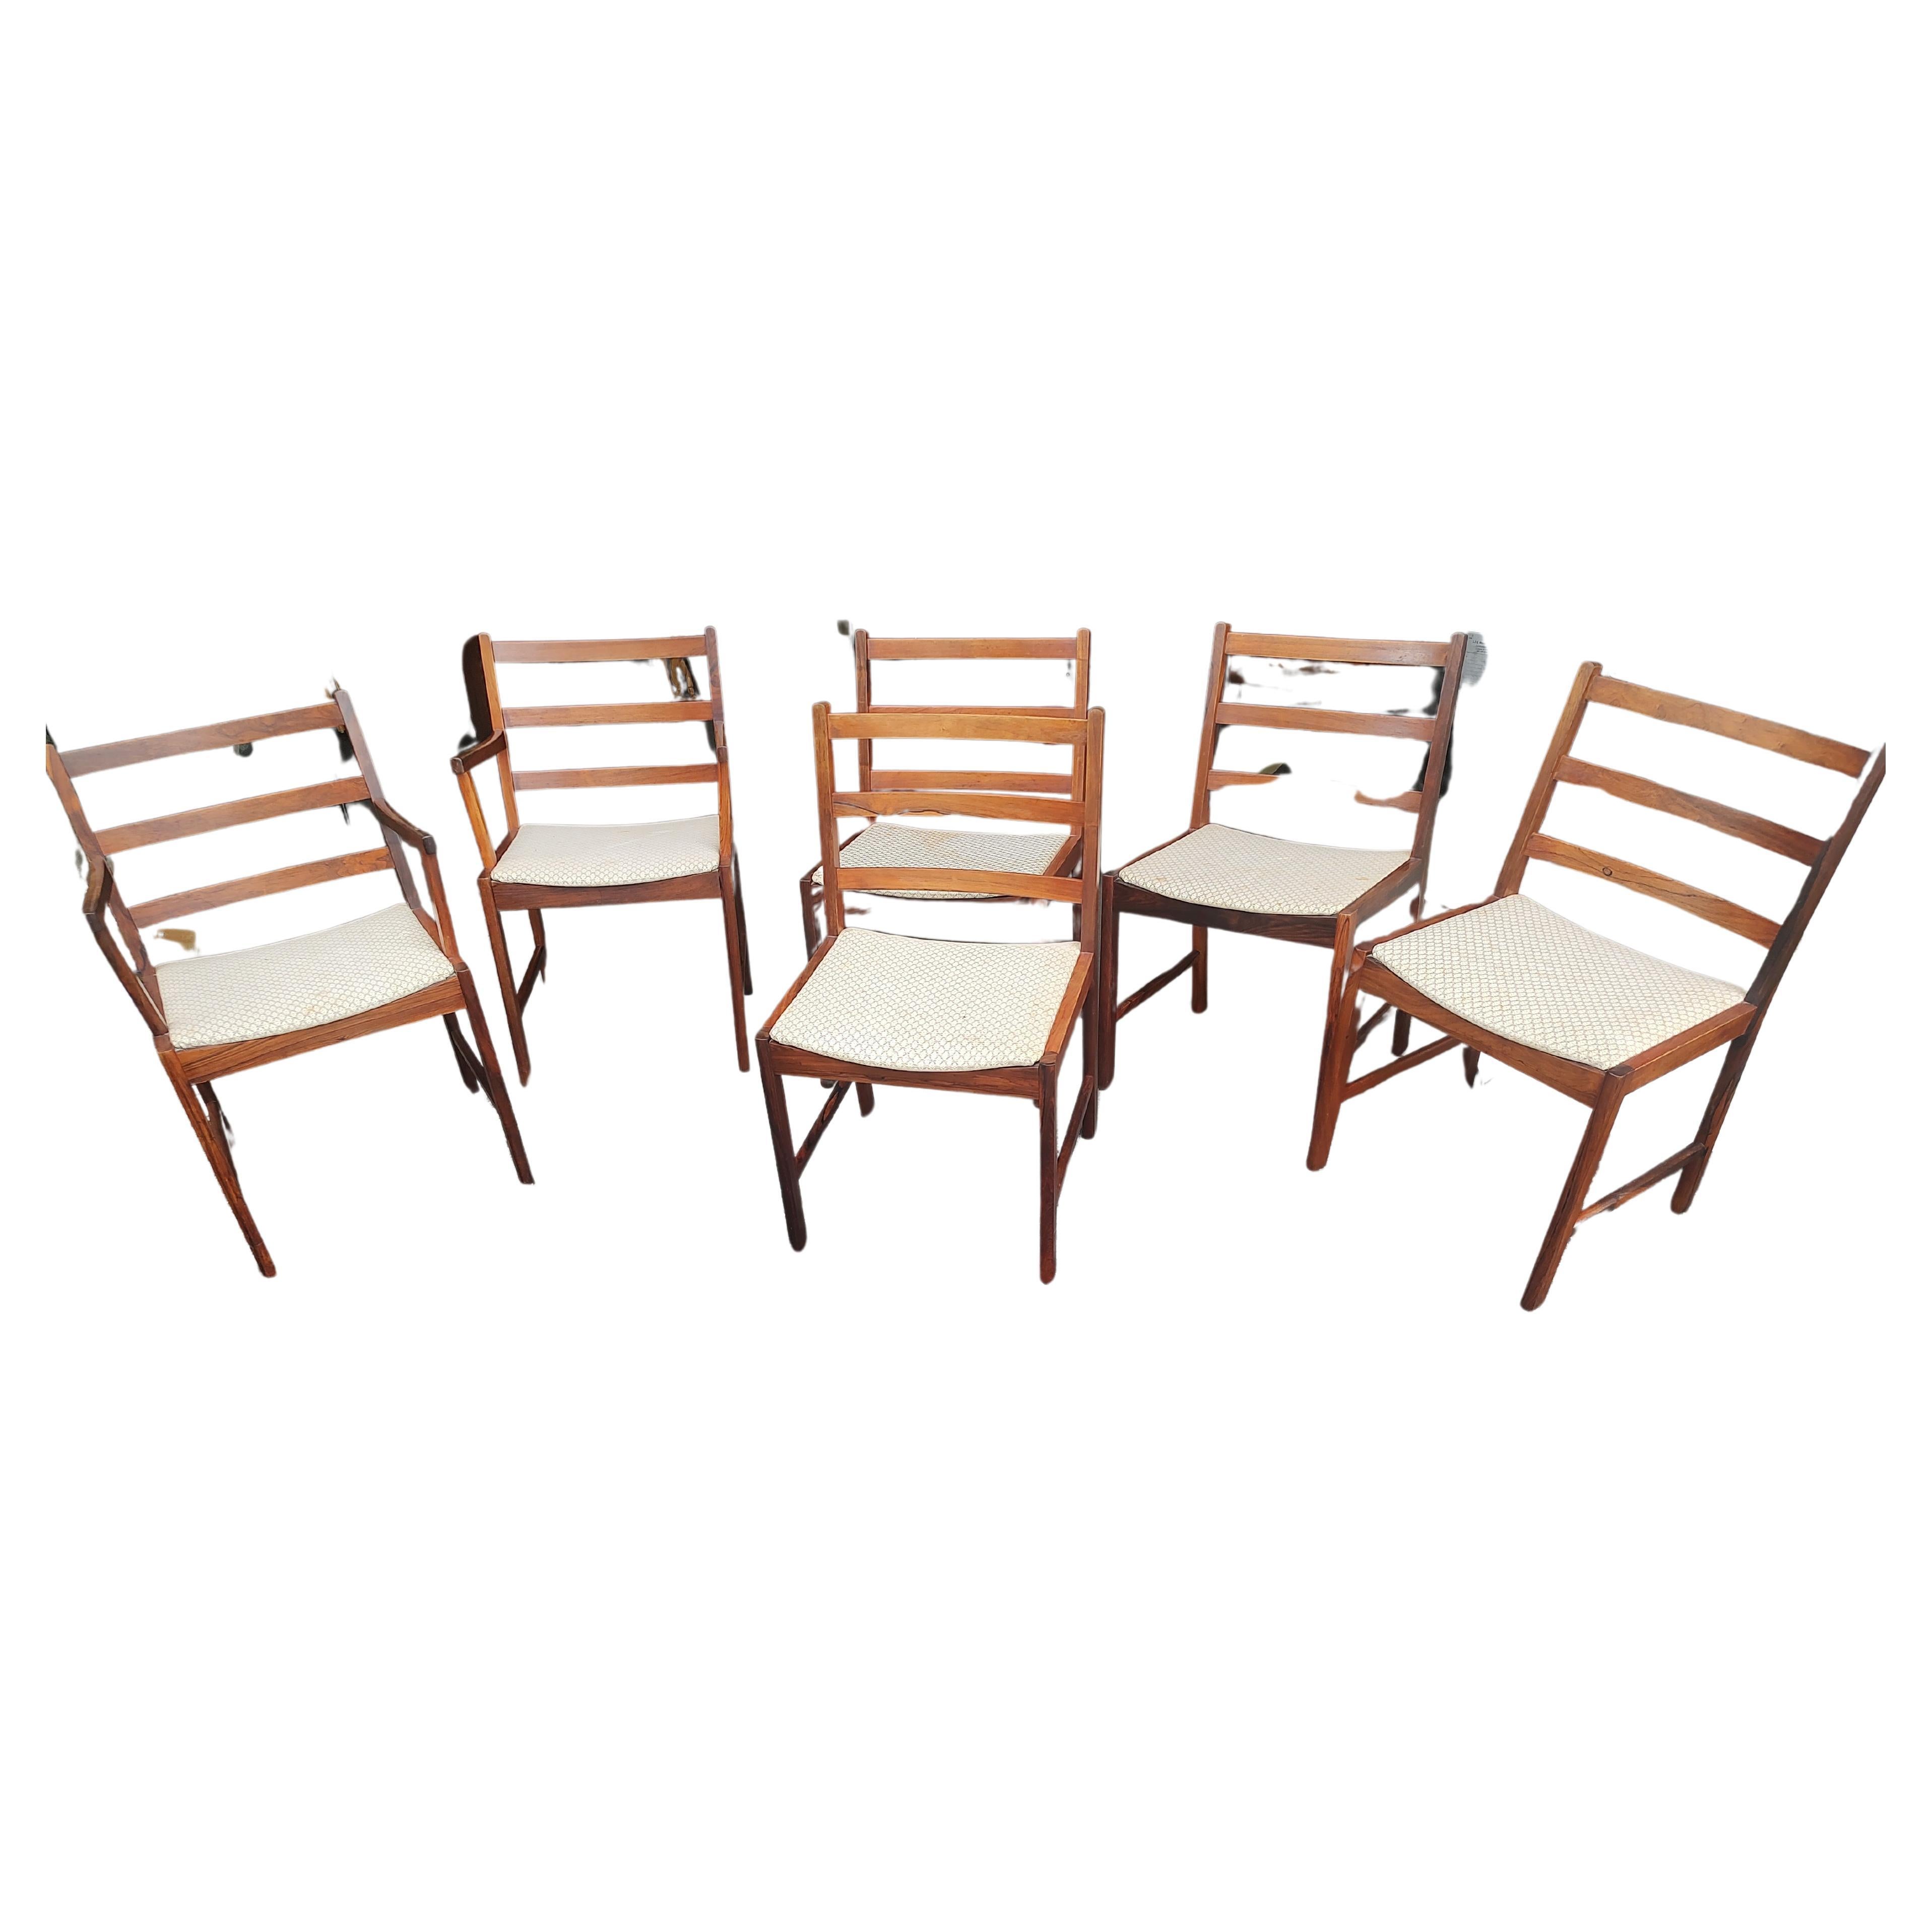 Mid-20th Century Mid-Century Modern Danish Rosewood Set of 6 Dining Chairs Style of Niels Moller For Sale